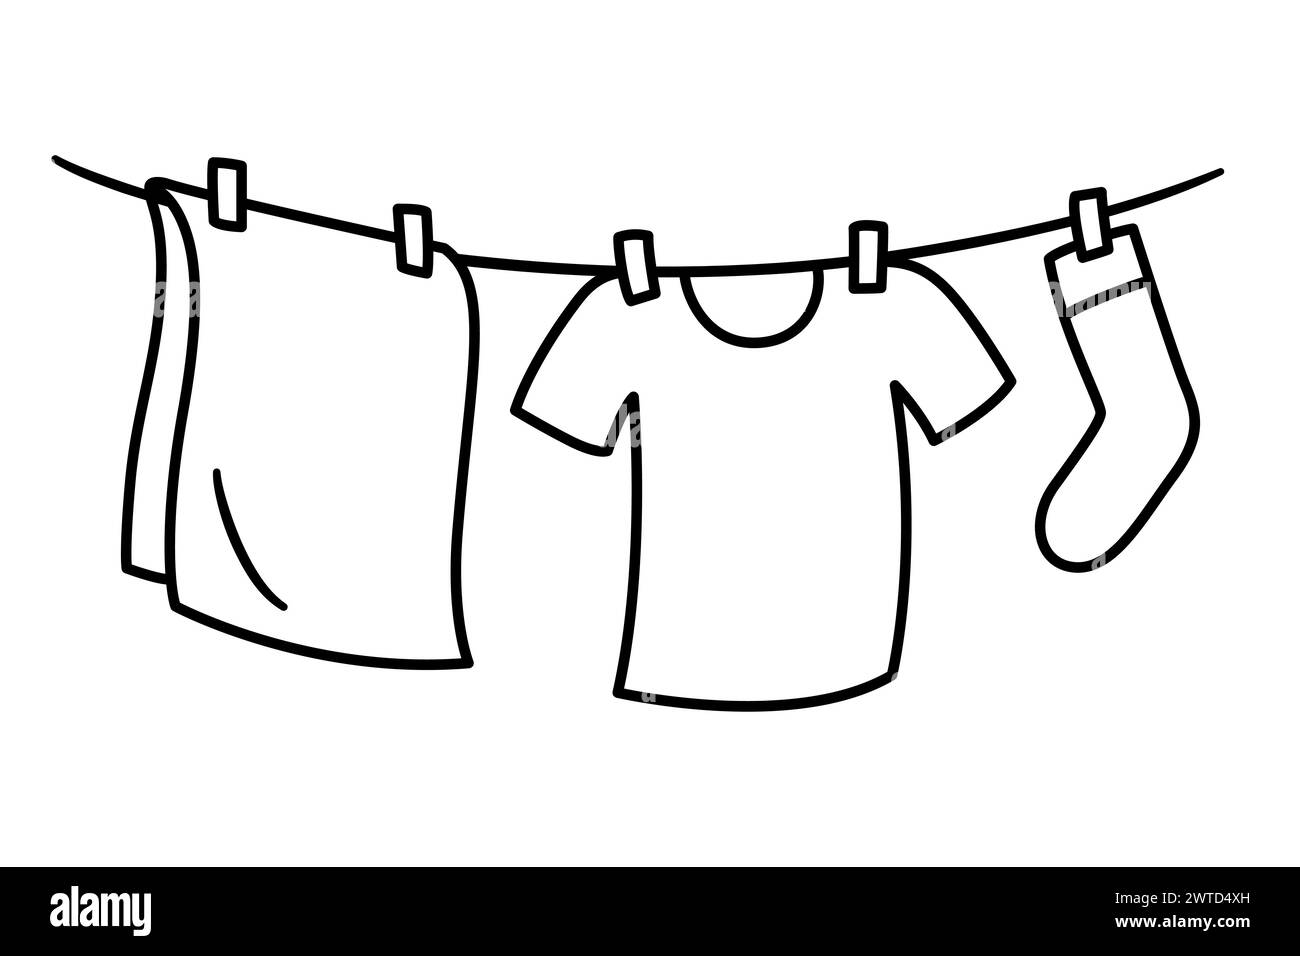 Clothes hanging to dry on washing line, simple cartoon drawing. Black and white laundry doodle icon. Hand drawn vector illustration. Stock Vector